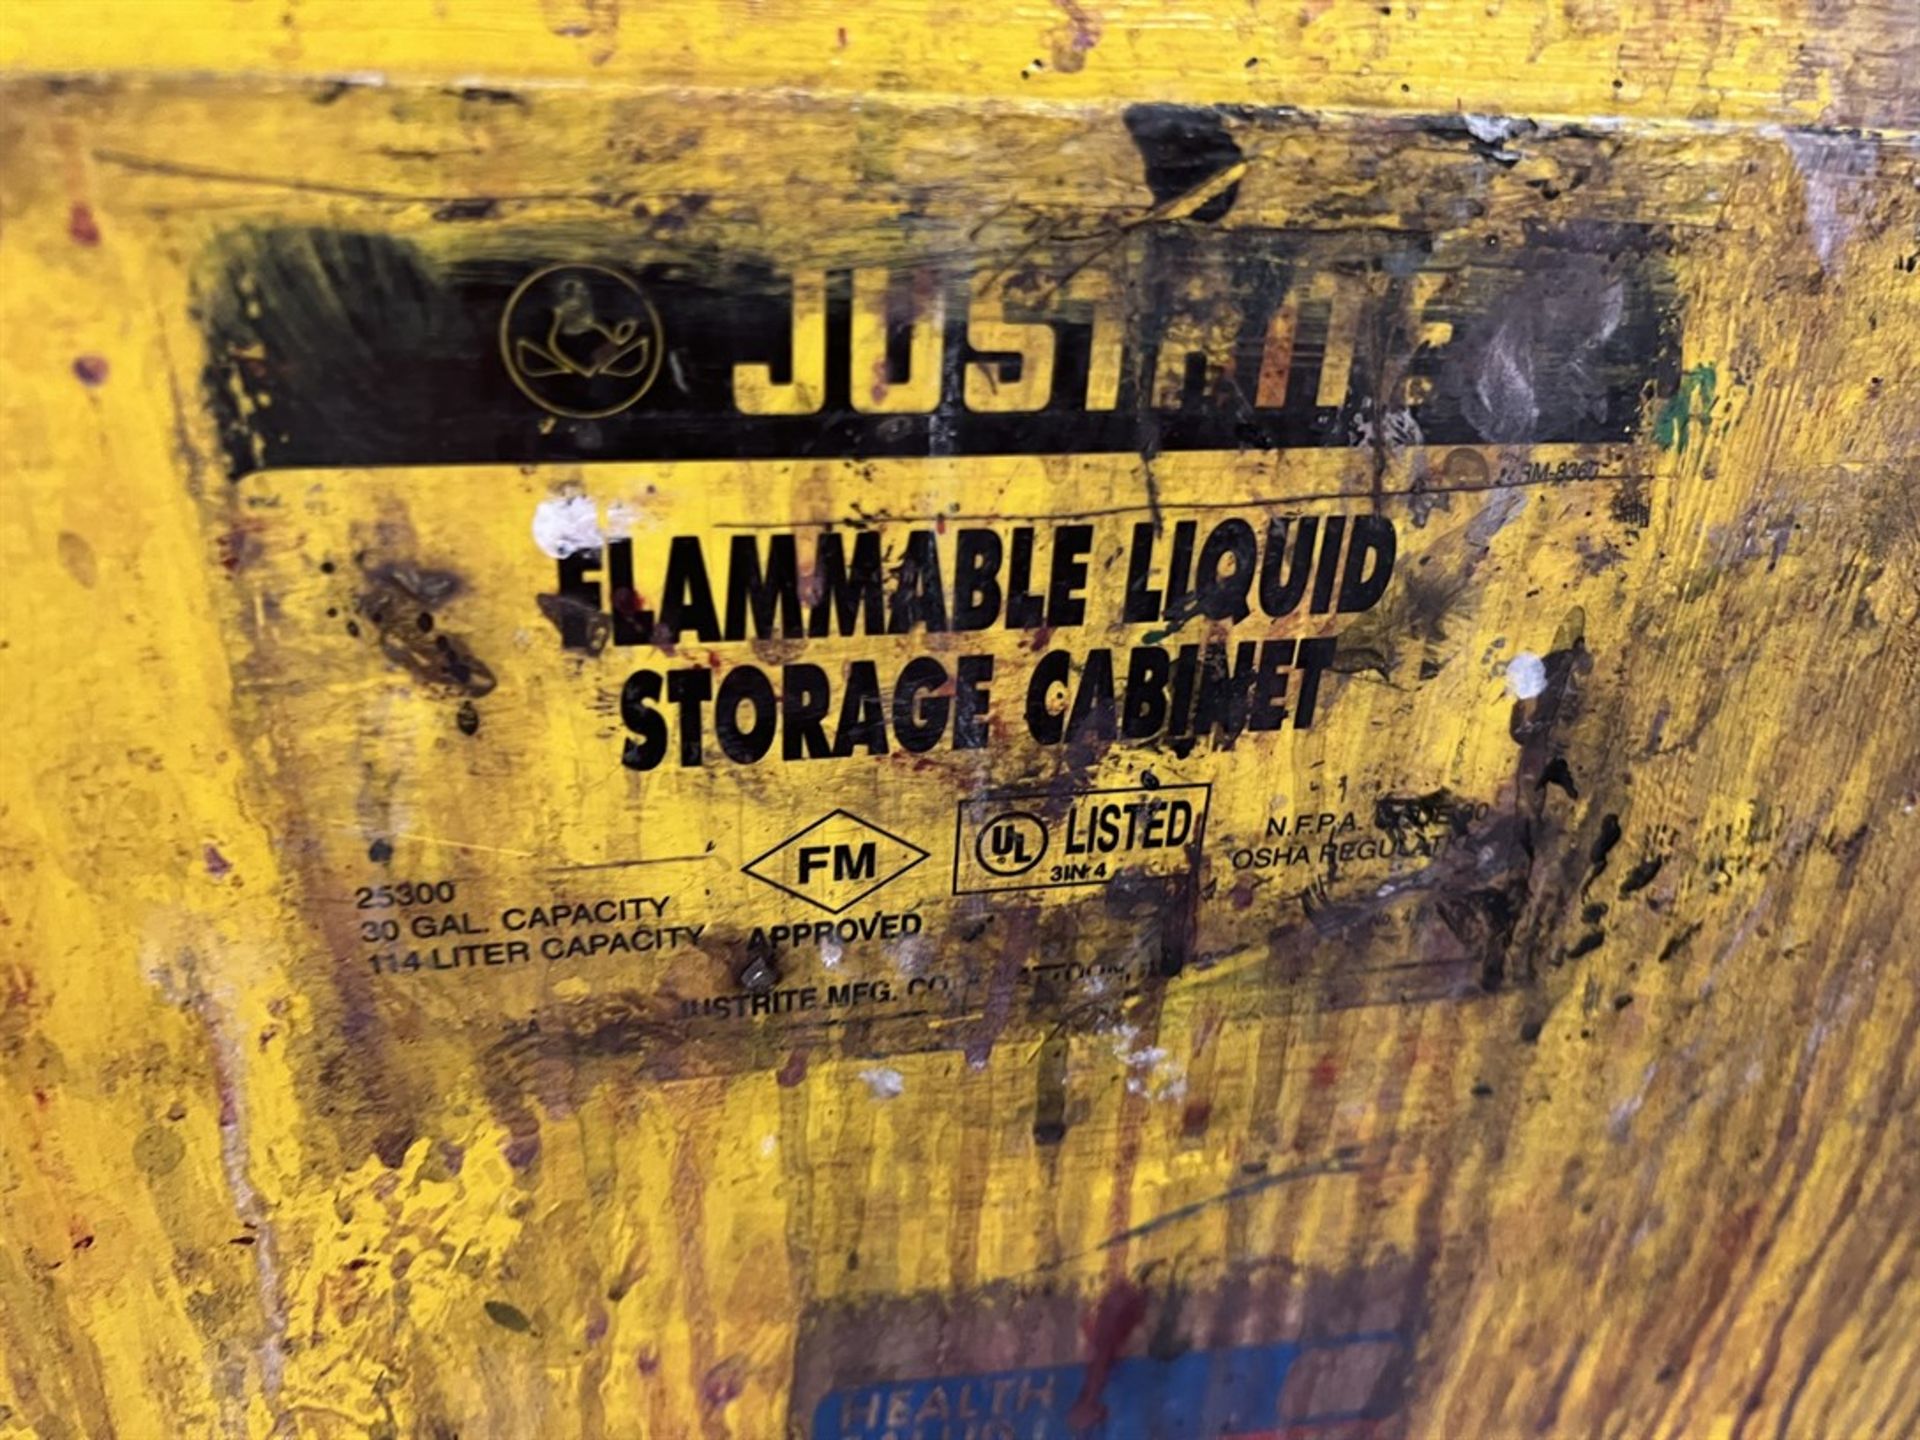 JUSTRITE 25300 Flammable Liquids Cabinet, 30Gallon, Bench Top Storage Cabinet and (2) Drum - Image 2 of 3